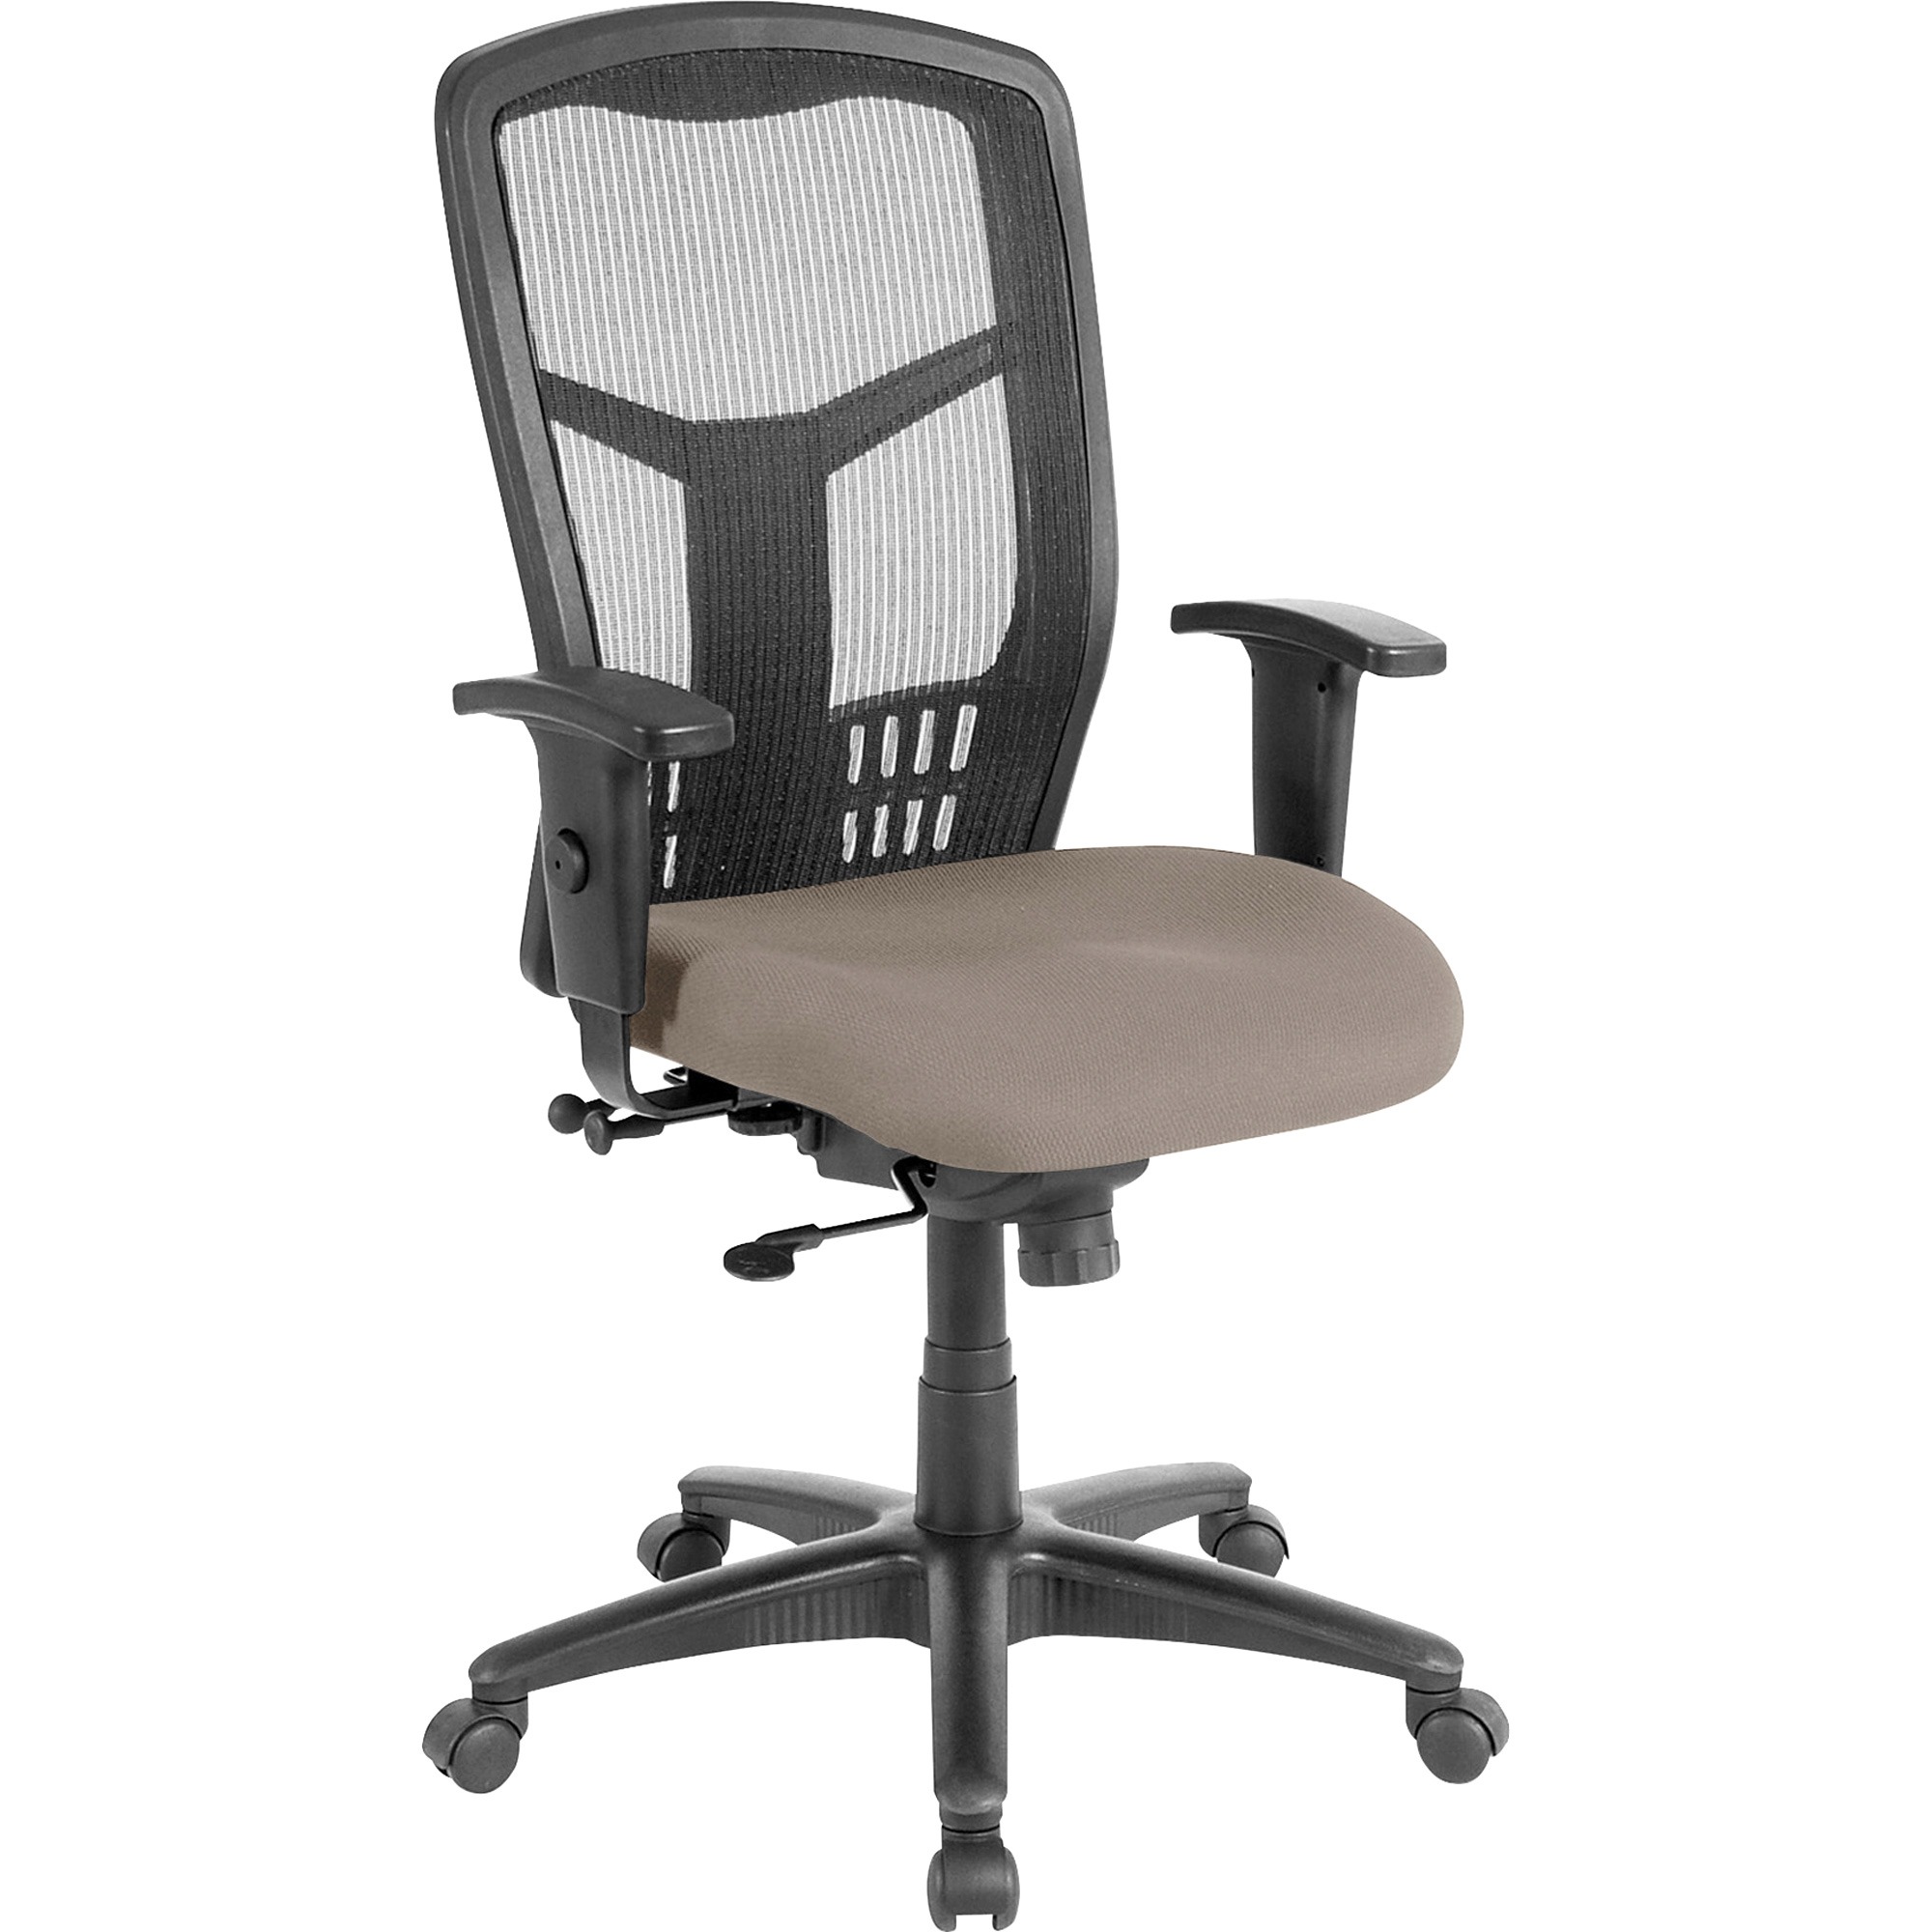 Lorell, Executive High-back Swivel Chair, 1 Each, Stratus,Brown - image 1 of 2